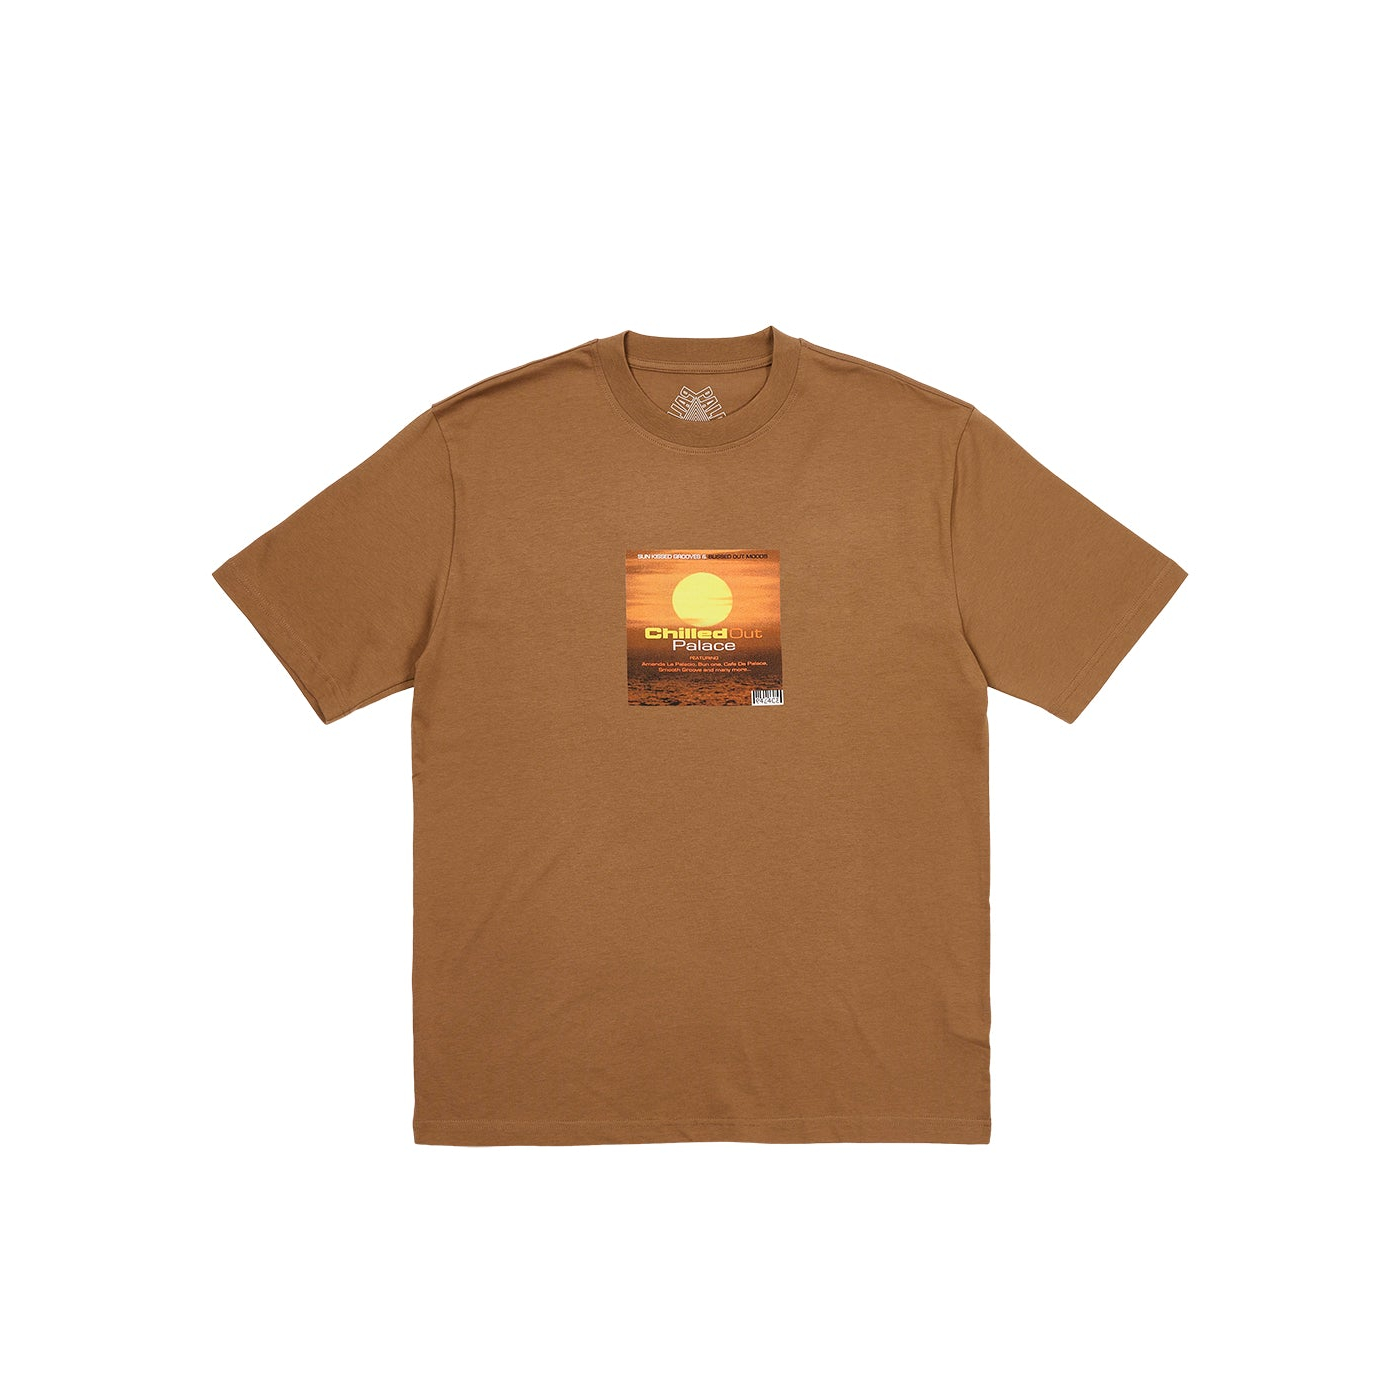 Thumbnail BLISSED OUT T-SHIRT MOCHA one color